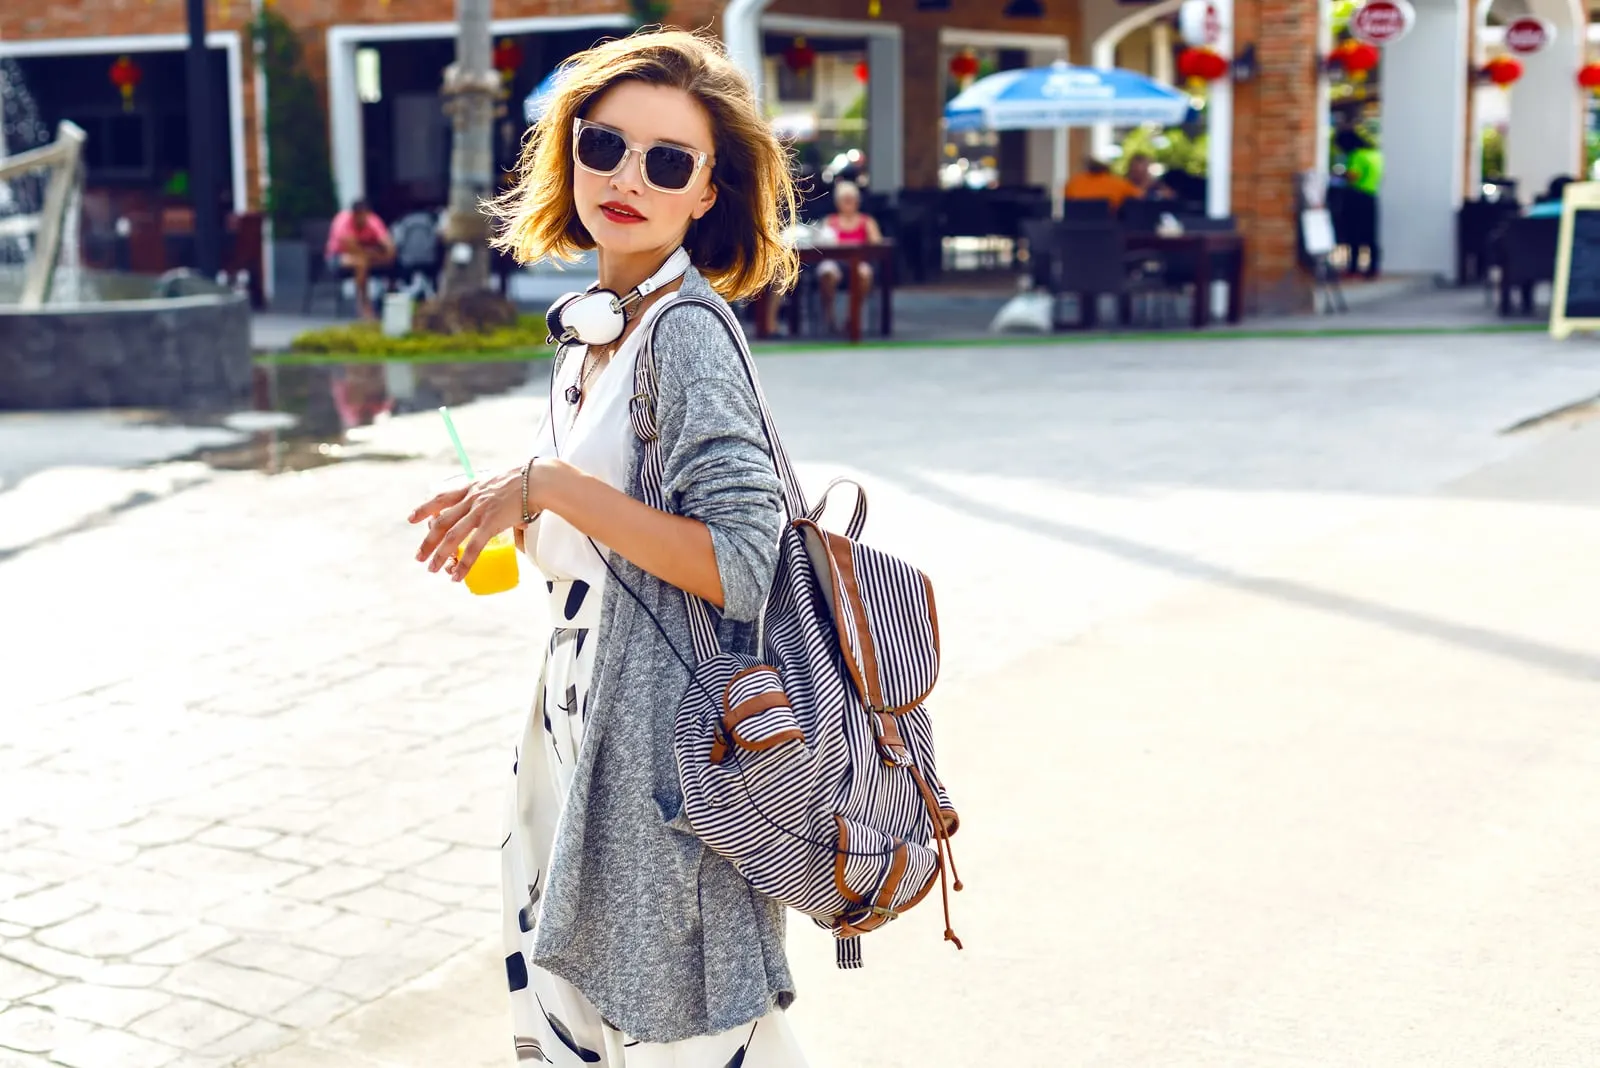 Summer sunny lifestyle fashion portrait of young stylish hipster woman